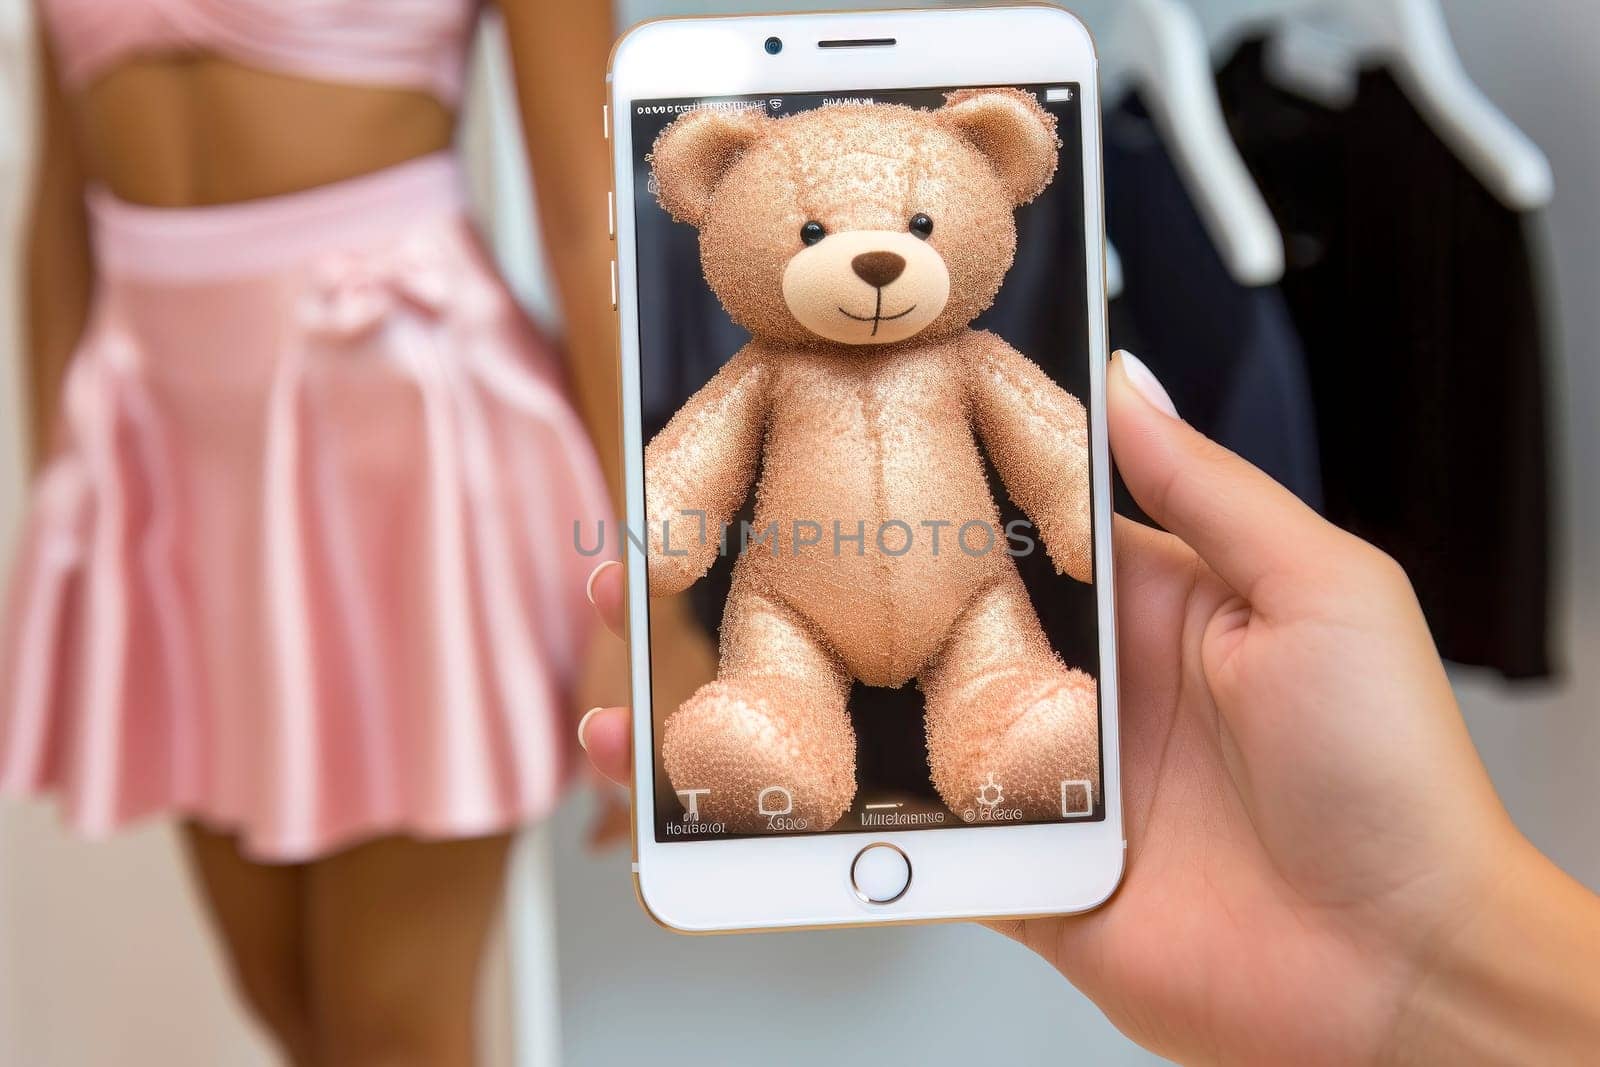 Image featuring a smartphone displaying a picture of a teddy bear, symbolizing childhood memories